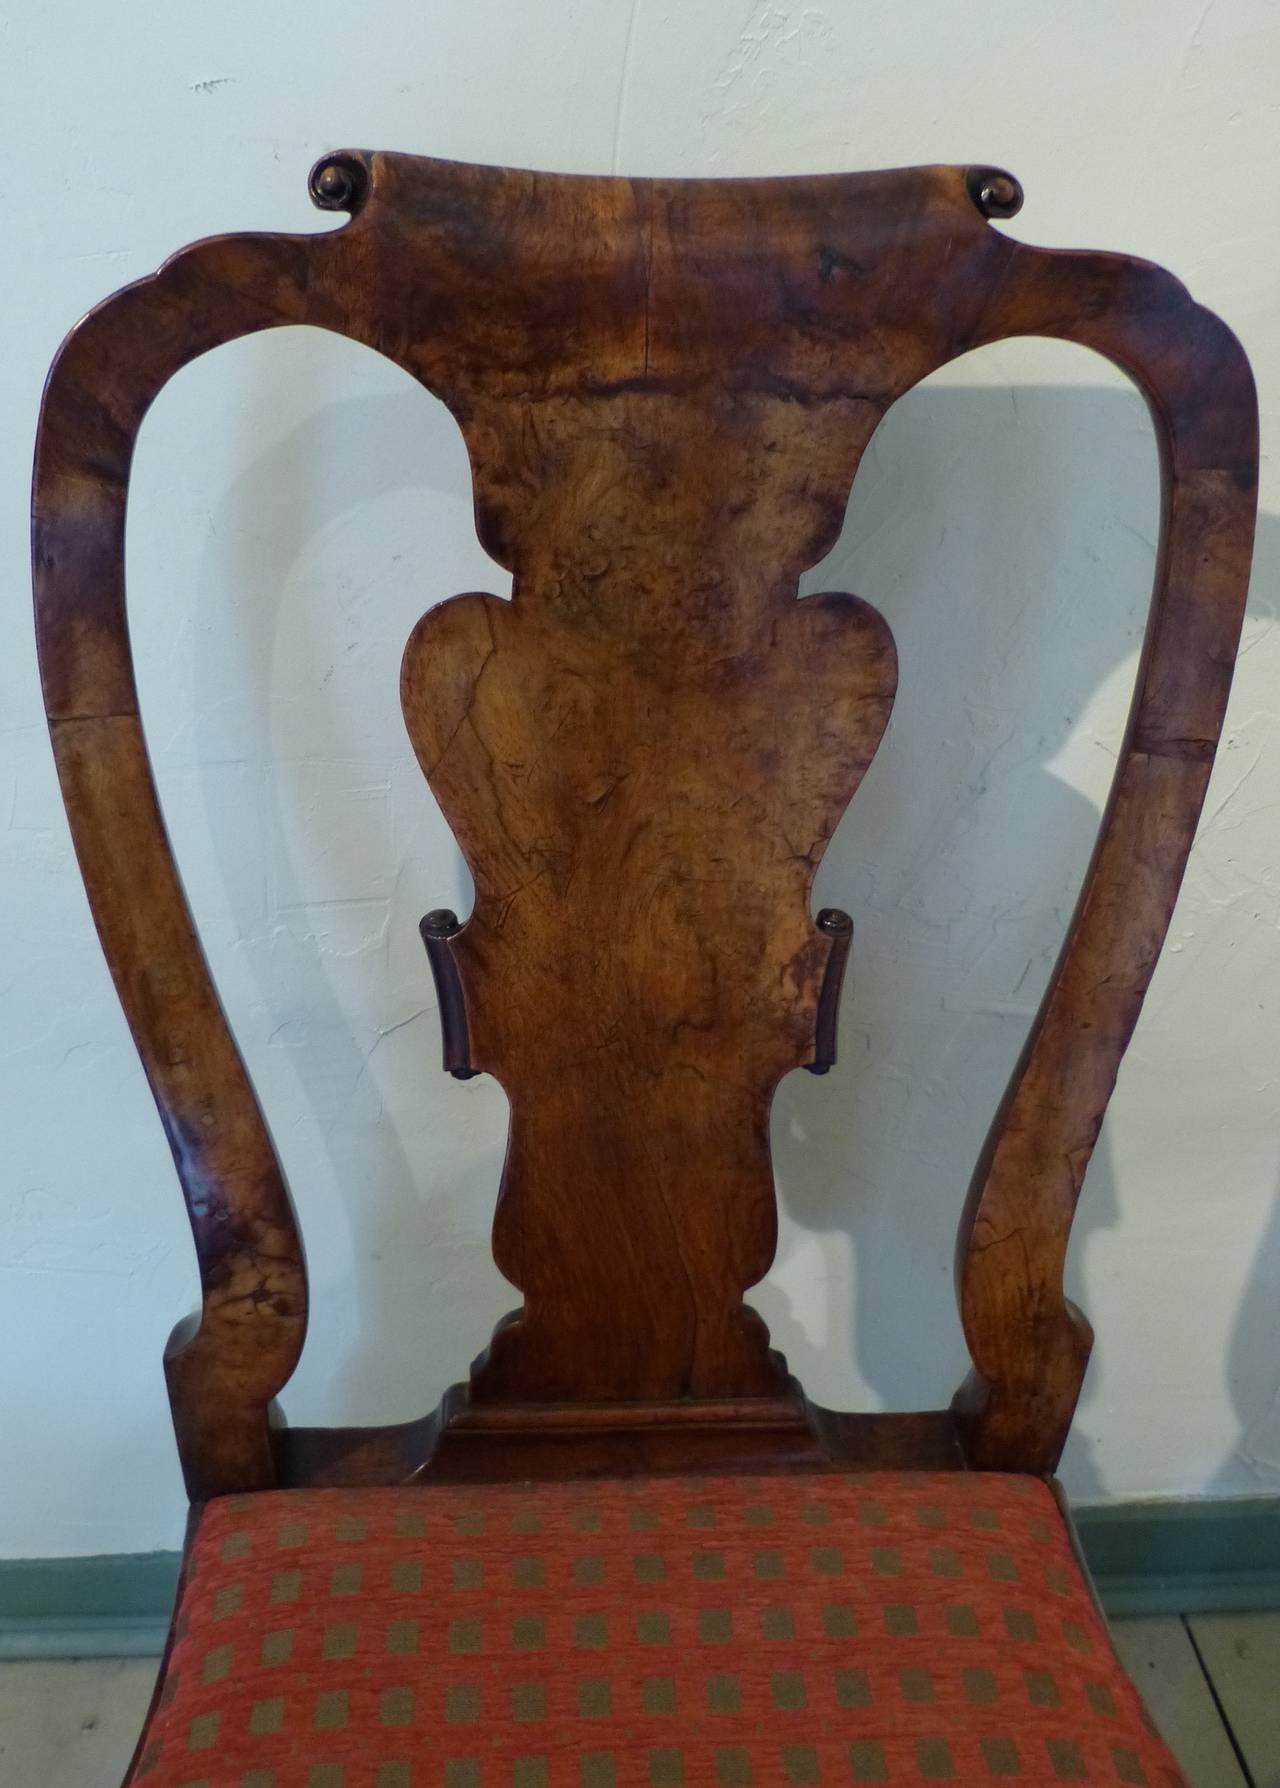 A fine quality English walnut early 18th century chair with shaped cabriole legs topped by carved acanthus leaf at the knees ending in slipper feet. The vasiform back splat with scrolled top and sides and shaped back supports, circa 1740.